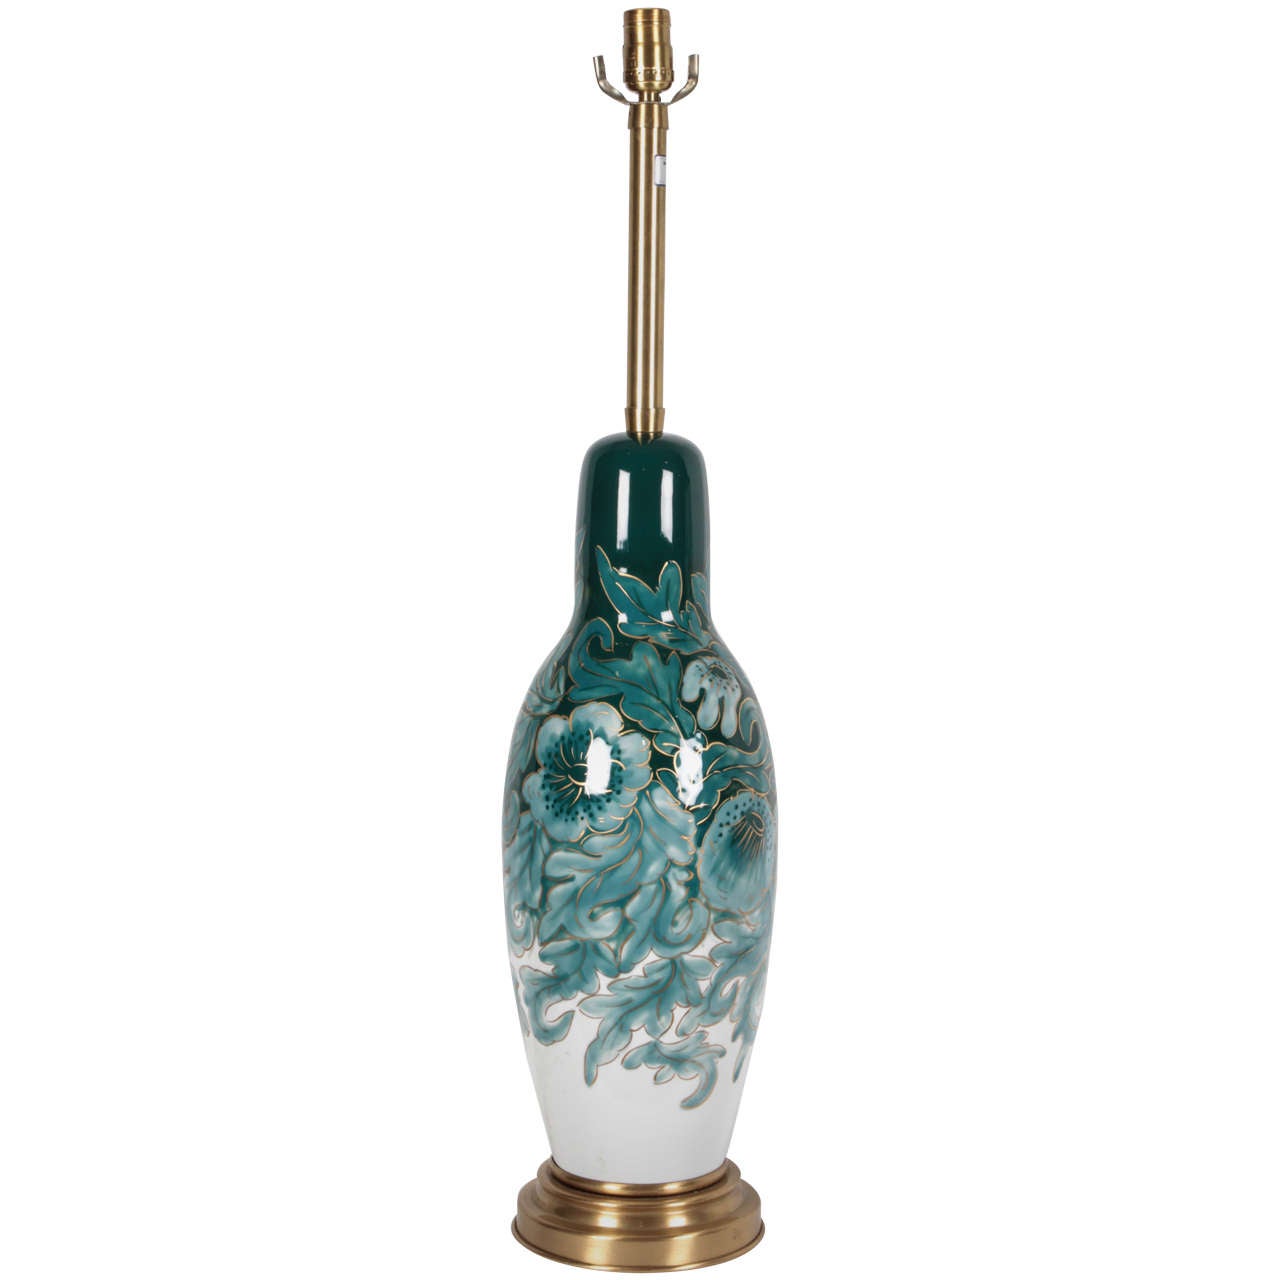 Important French Porcelain Lamp by Camille Tharaud